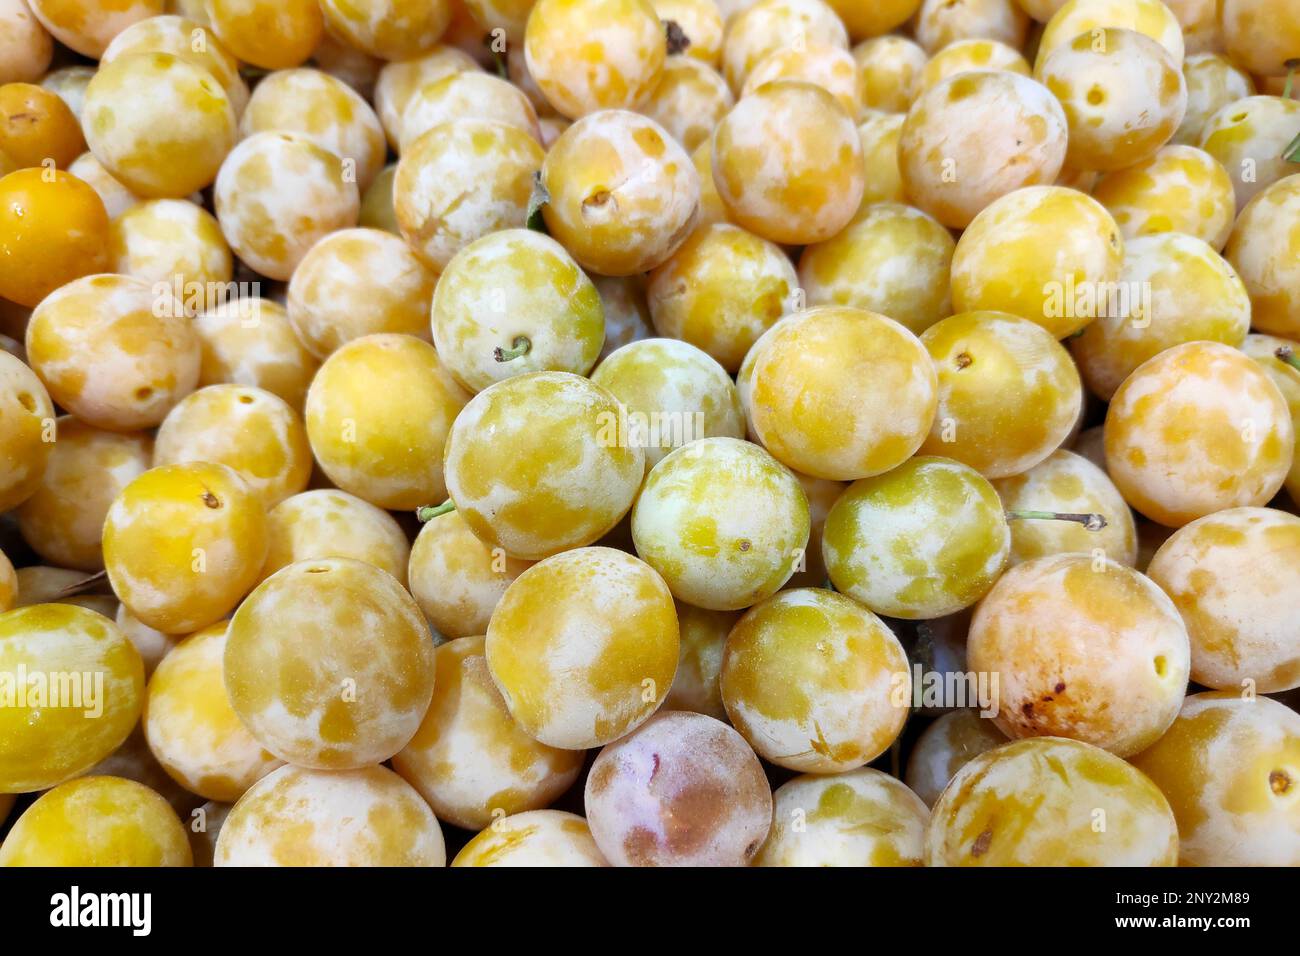 Close-up on a stack of Mirabelle plums on a market stall. Stock Photo